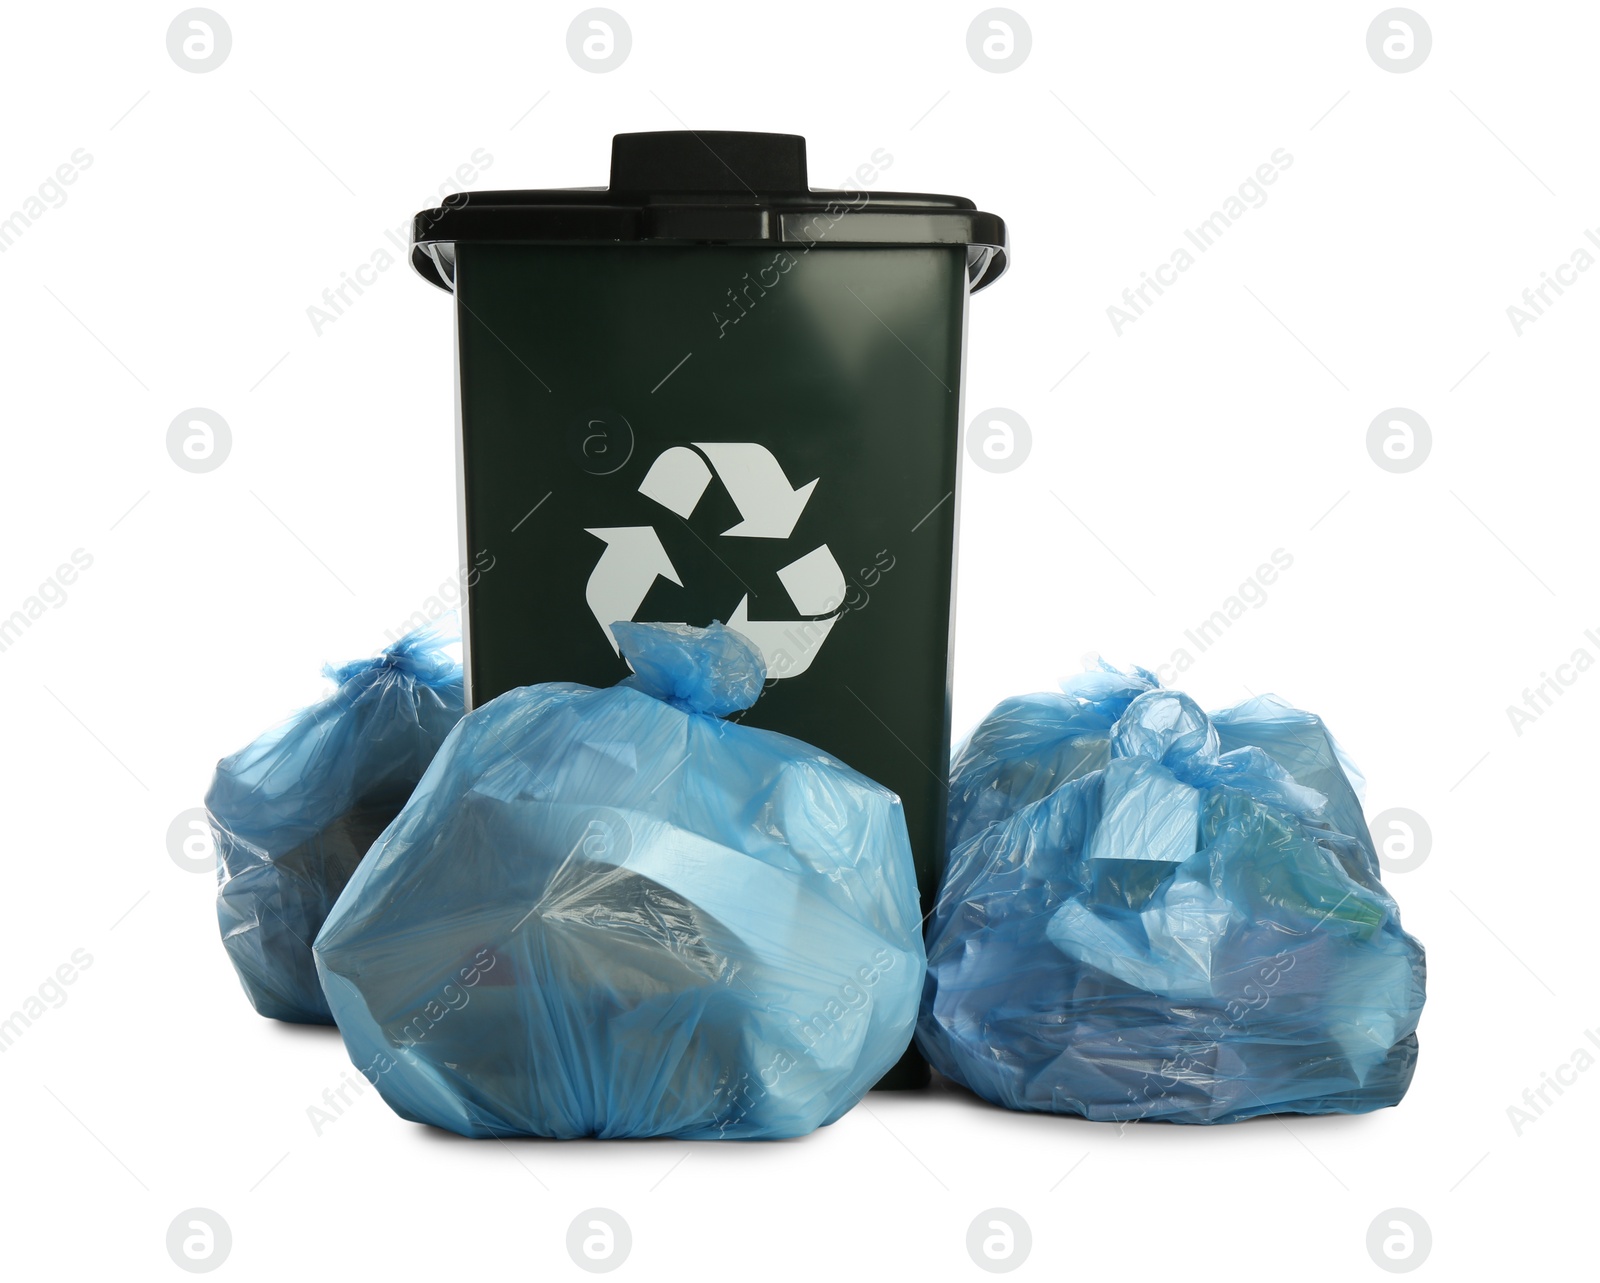 Photo of Trash bag filled with garbage near dark green recycling bin on white background